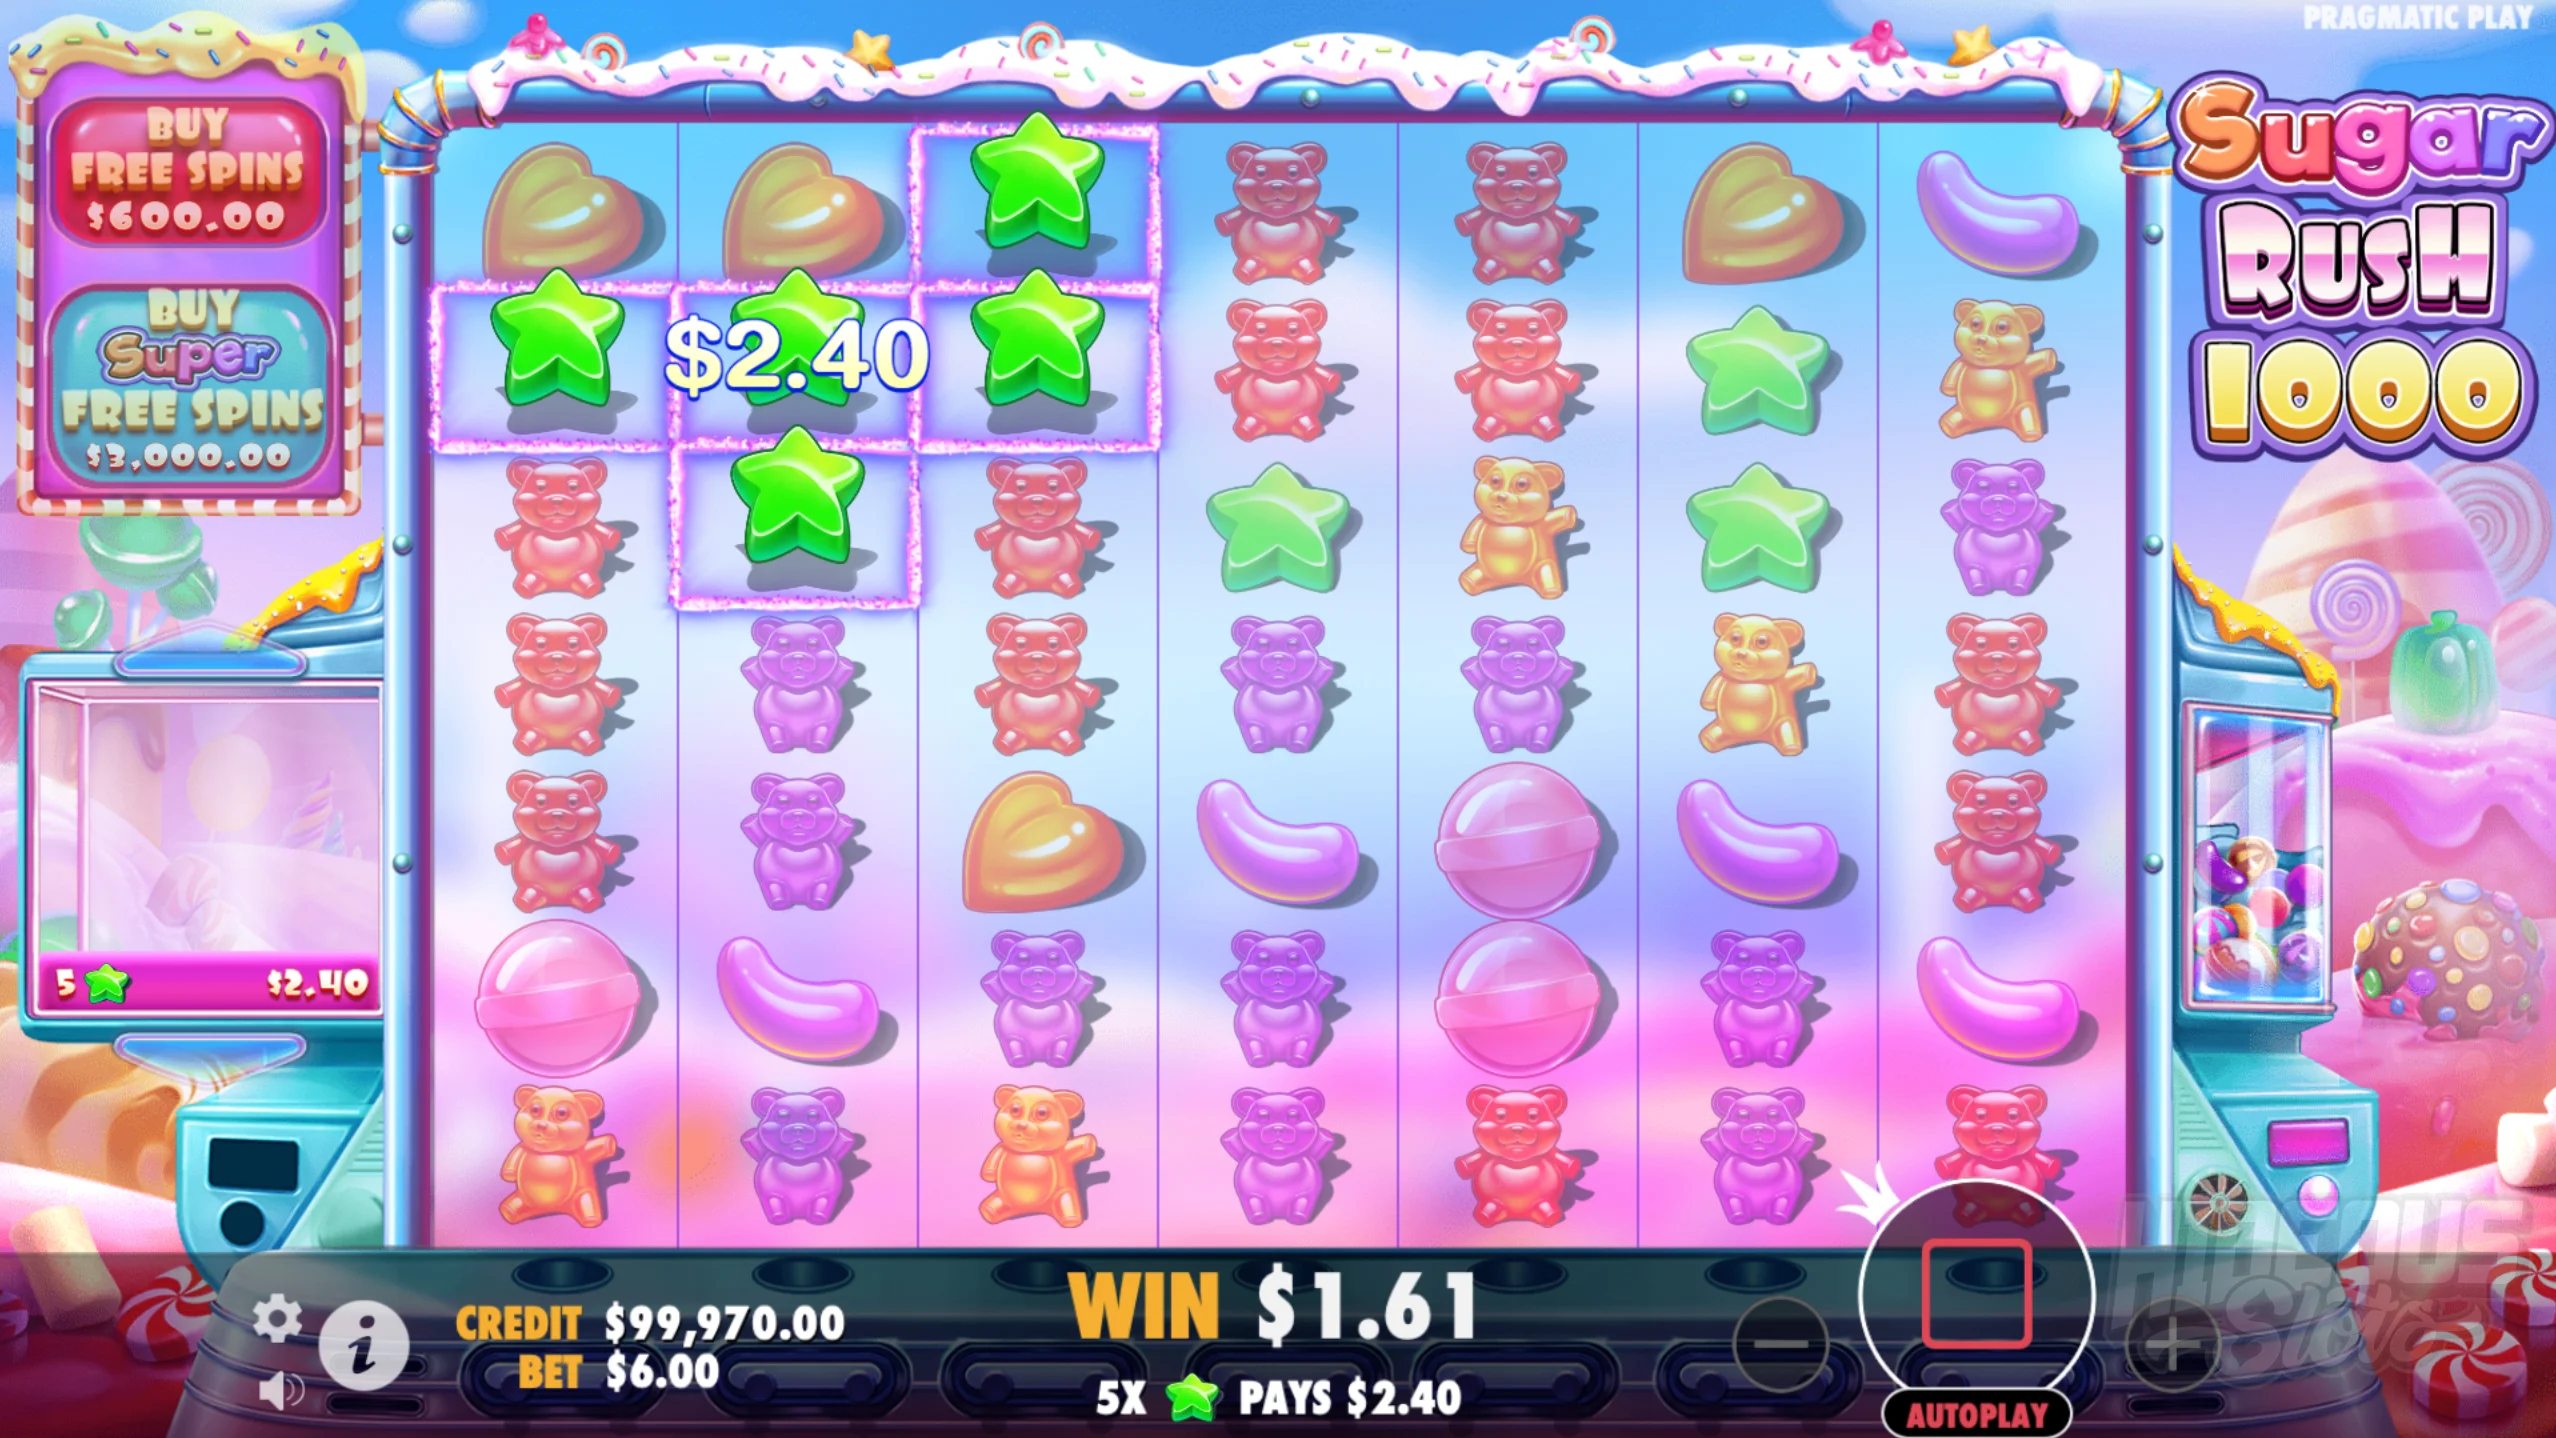 Land Clusters of 5 or More Matching Symbols Touching Horizontally or Vertically to Form Wins in Sugar Rush 1000